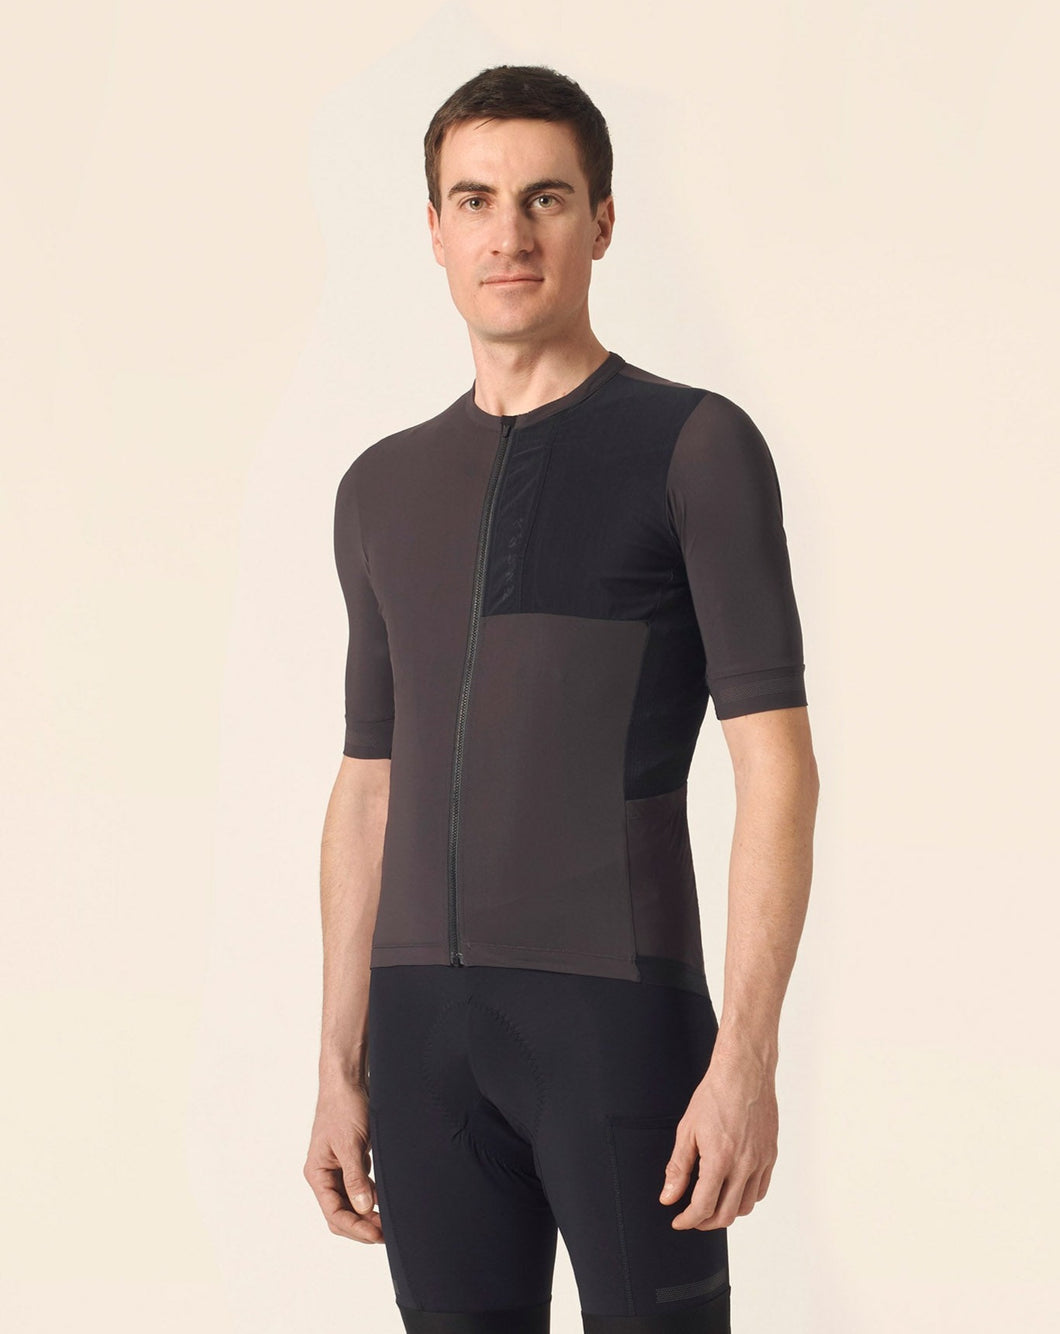 PEdALED Odyssey Long Distance Adventure Jersey - Turkish Coffee